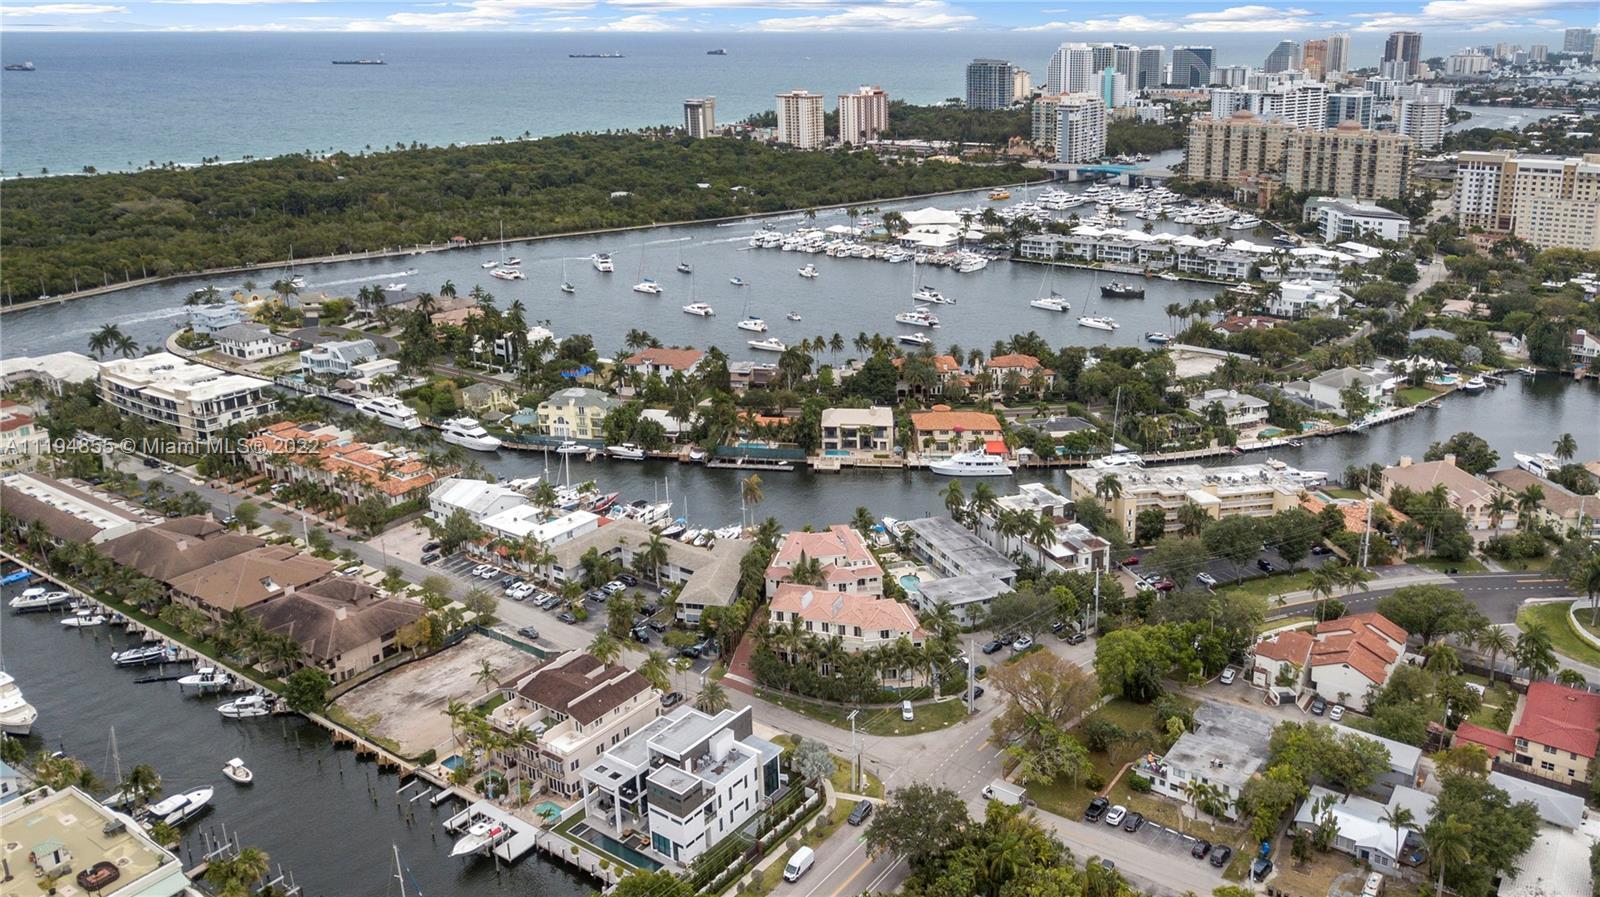 LIVE THE ULTIMATE SOUTH FLORIDA WATERFRONT LIFESTYLE! Rarely available nestled at the Widest part of